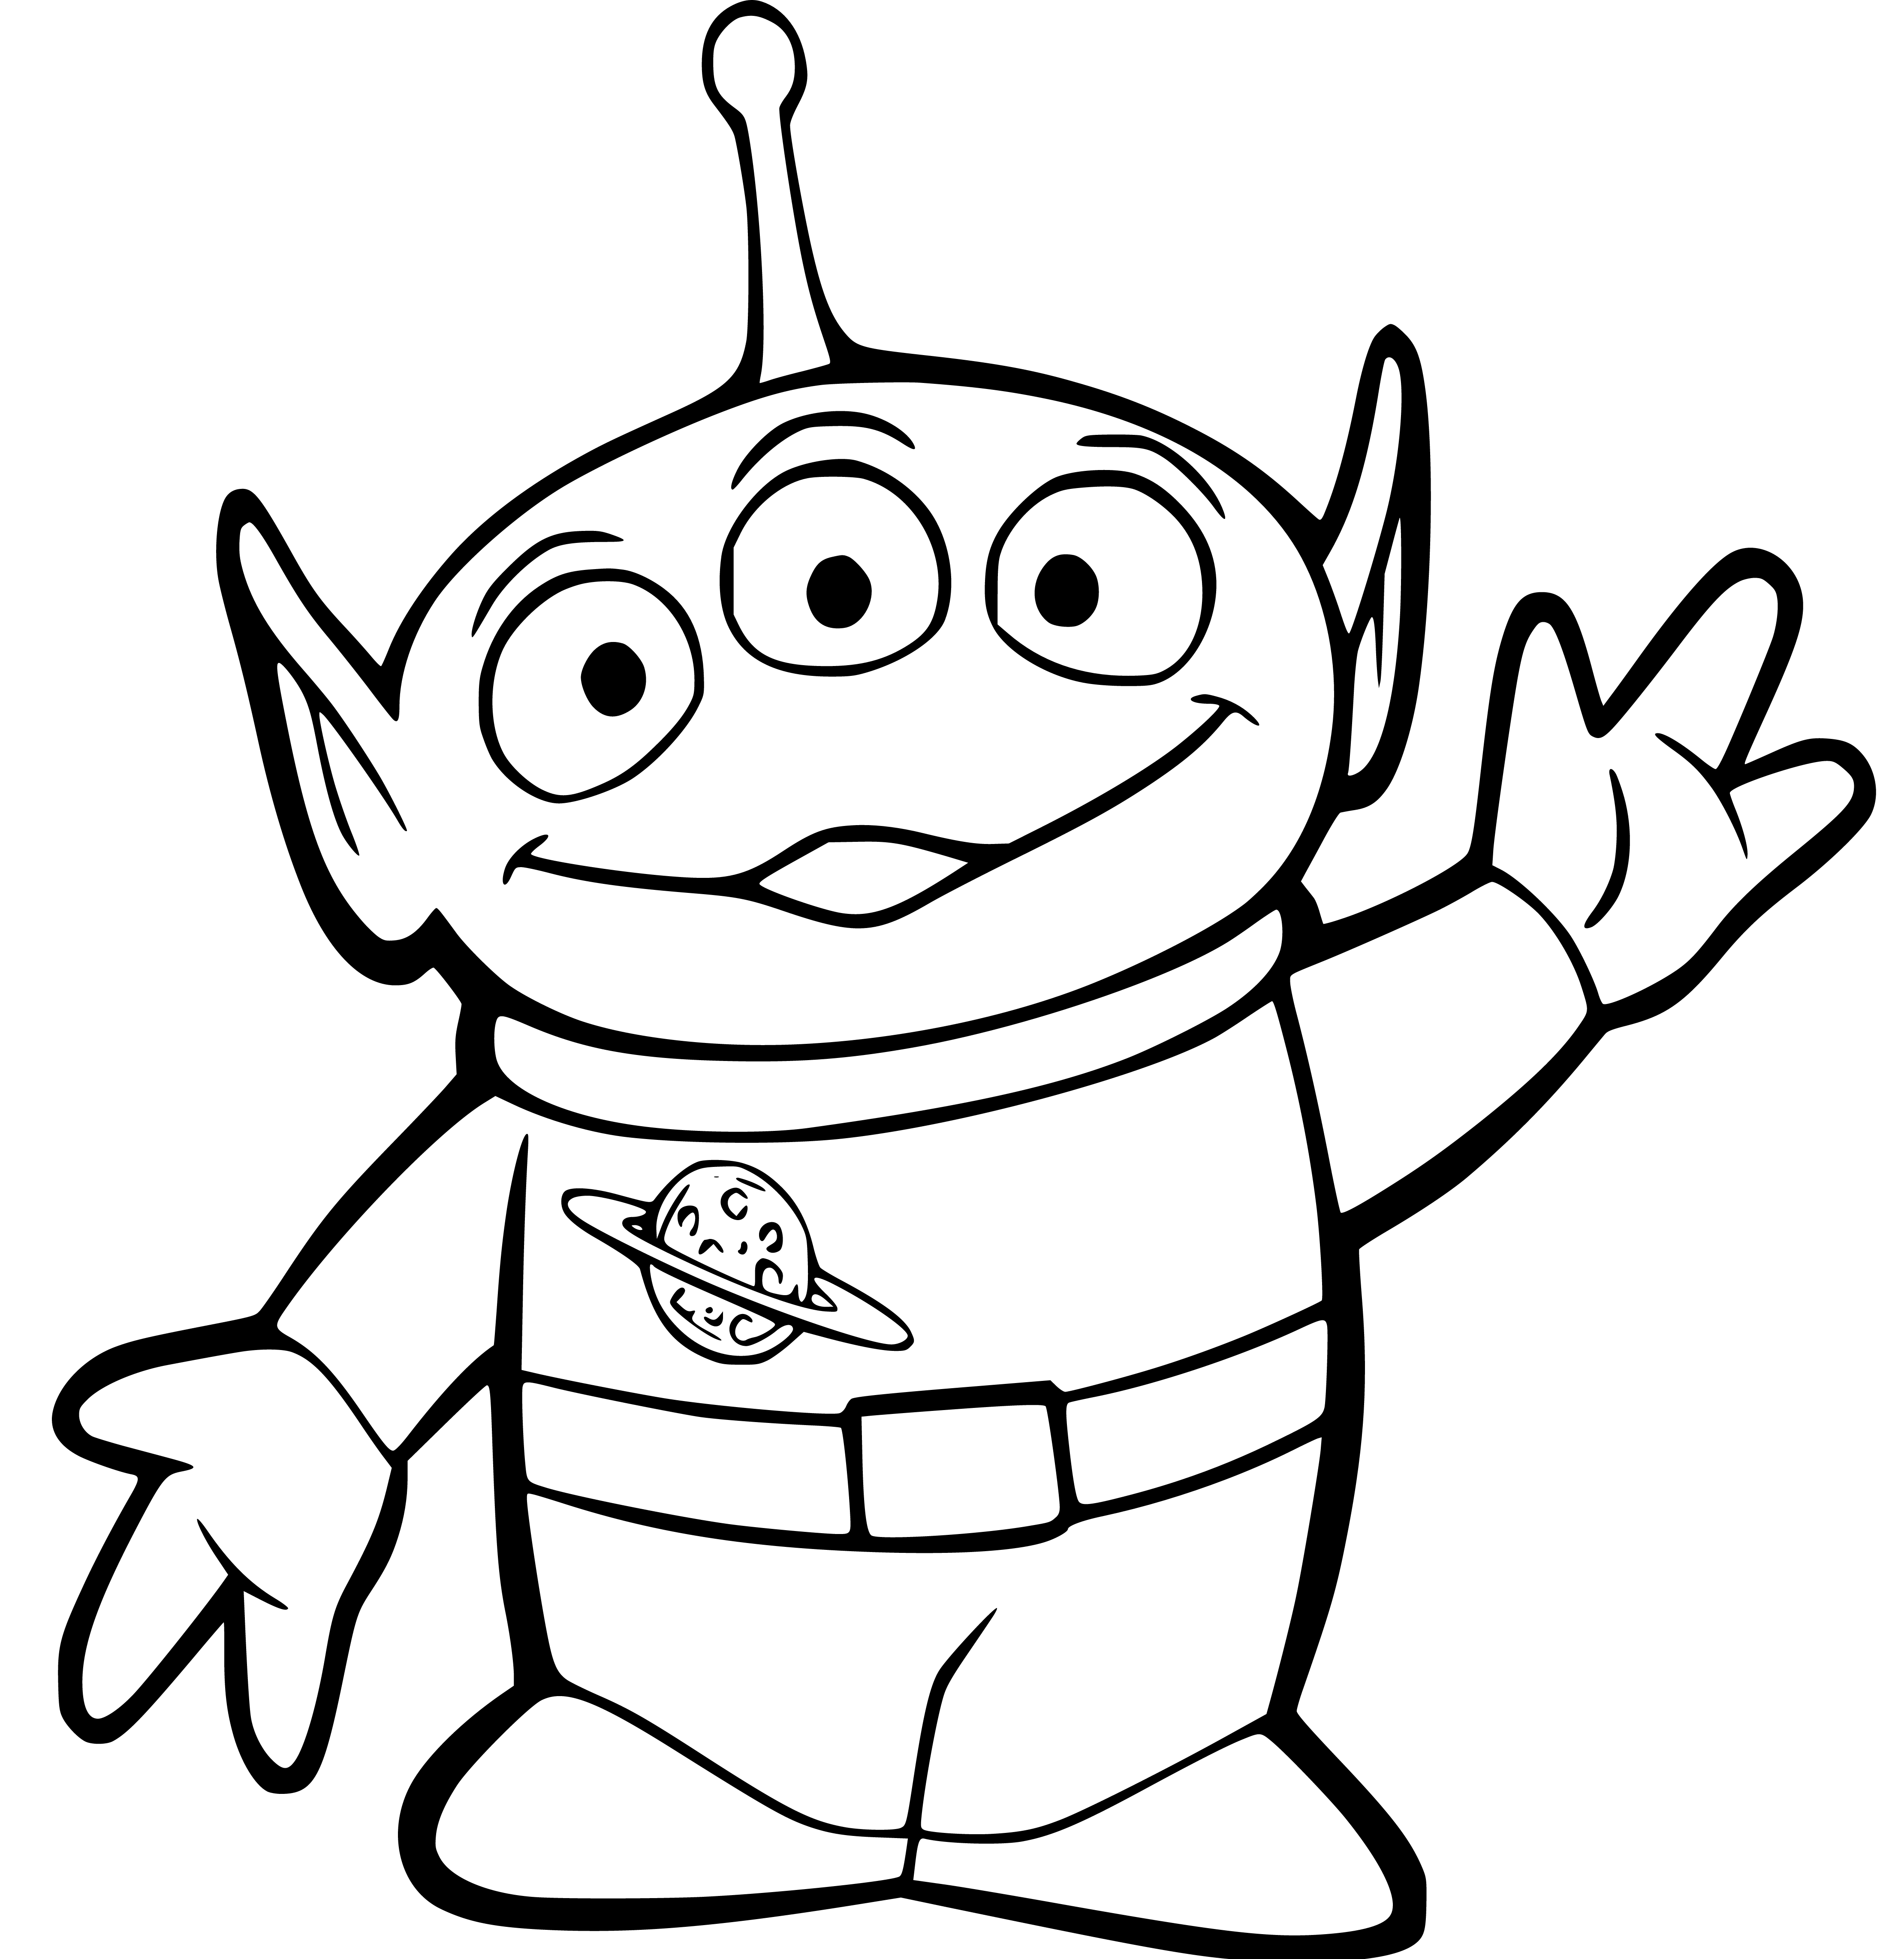 Toy Story Alien Coloring Pages - Coloring Sheets